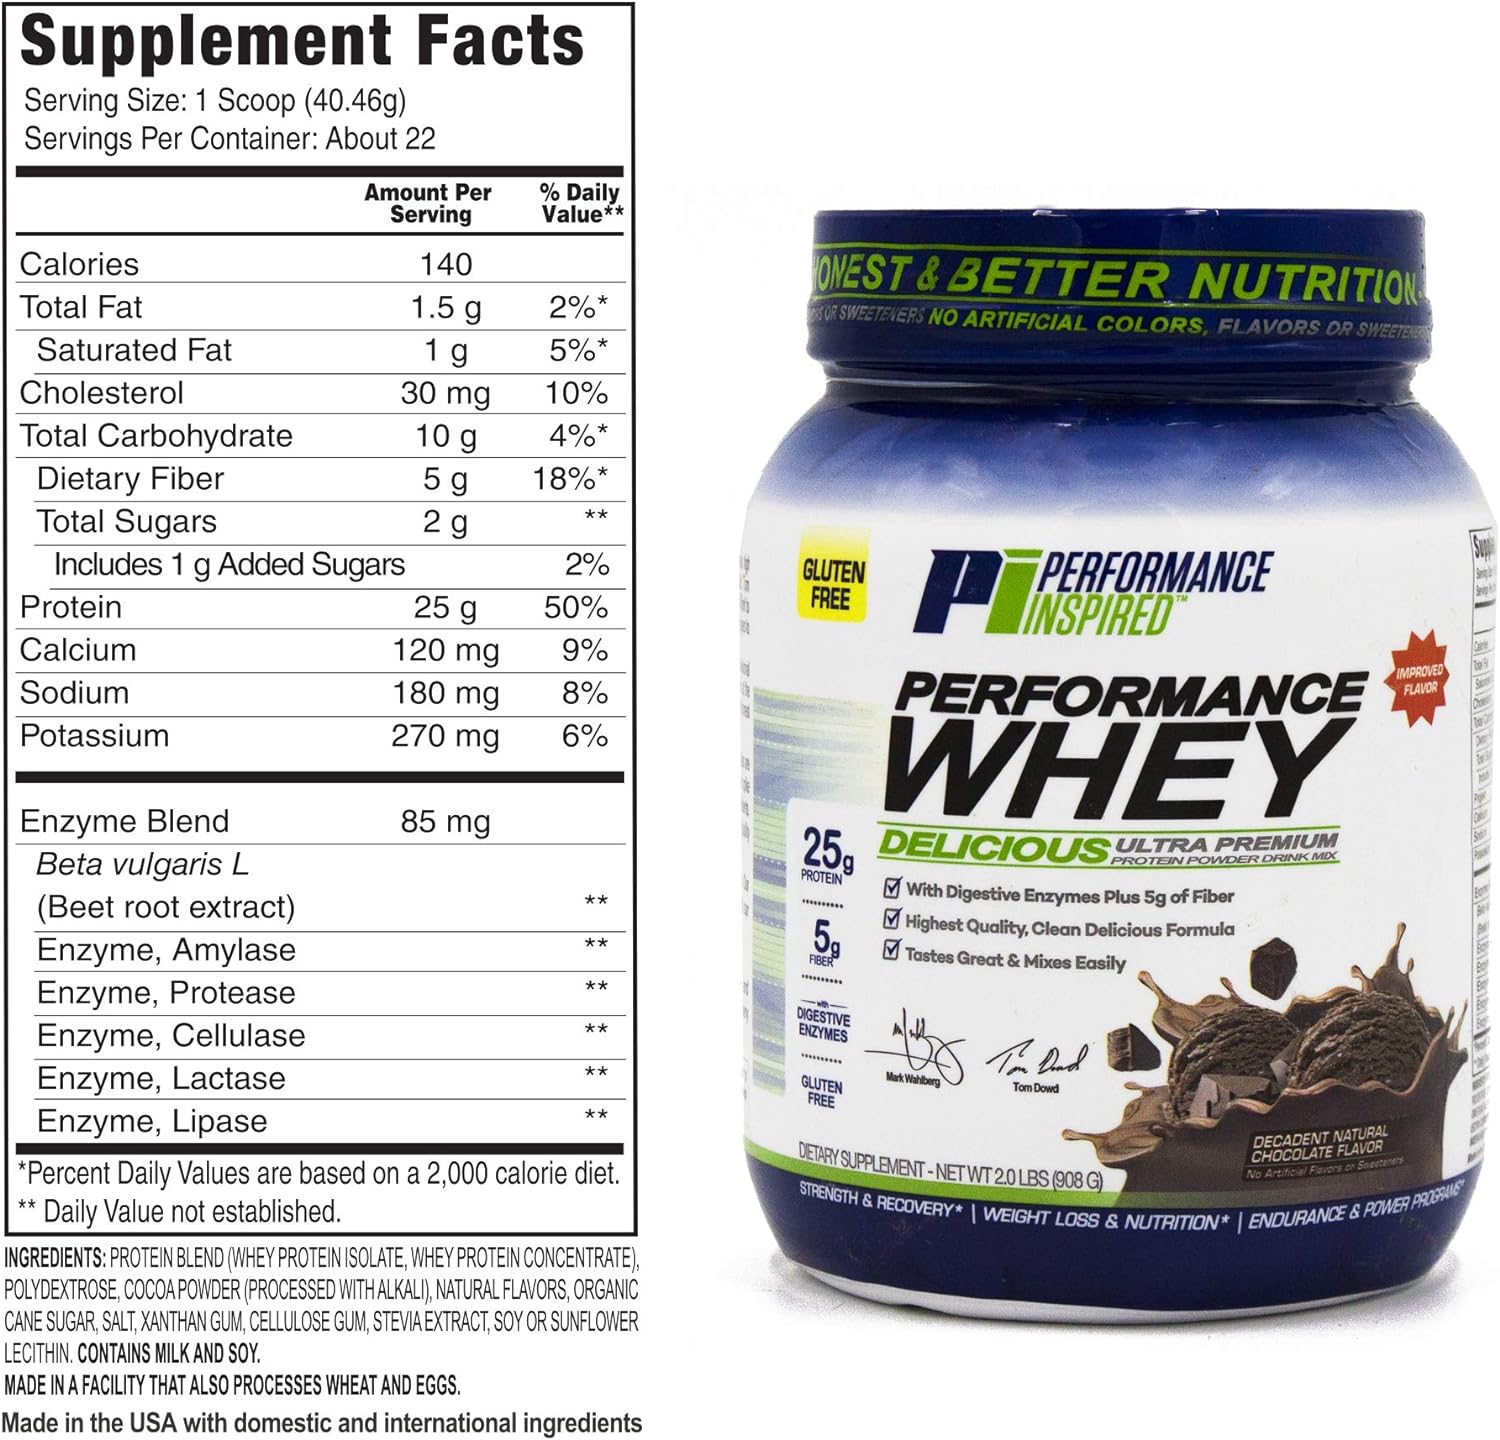 Performance Inspired Nutrition WHEY Protein Powder - All Natural - 25G